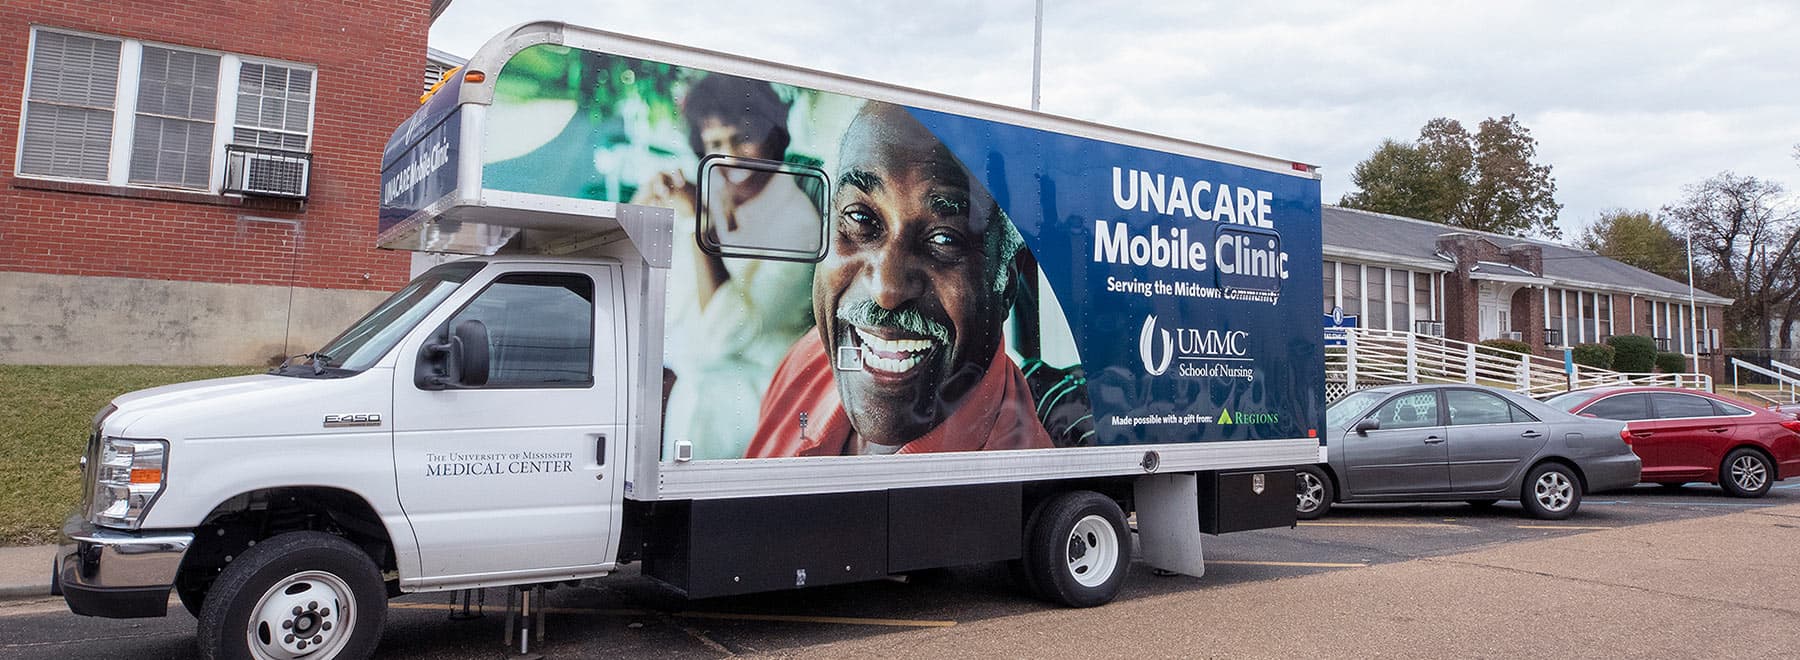 The UNACARE mobile clinic parked in front of Martin Head Start Center in Jackson.